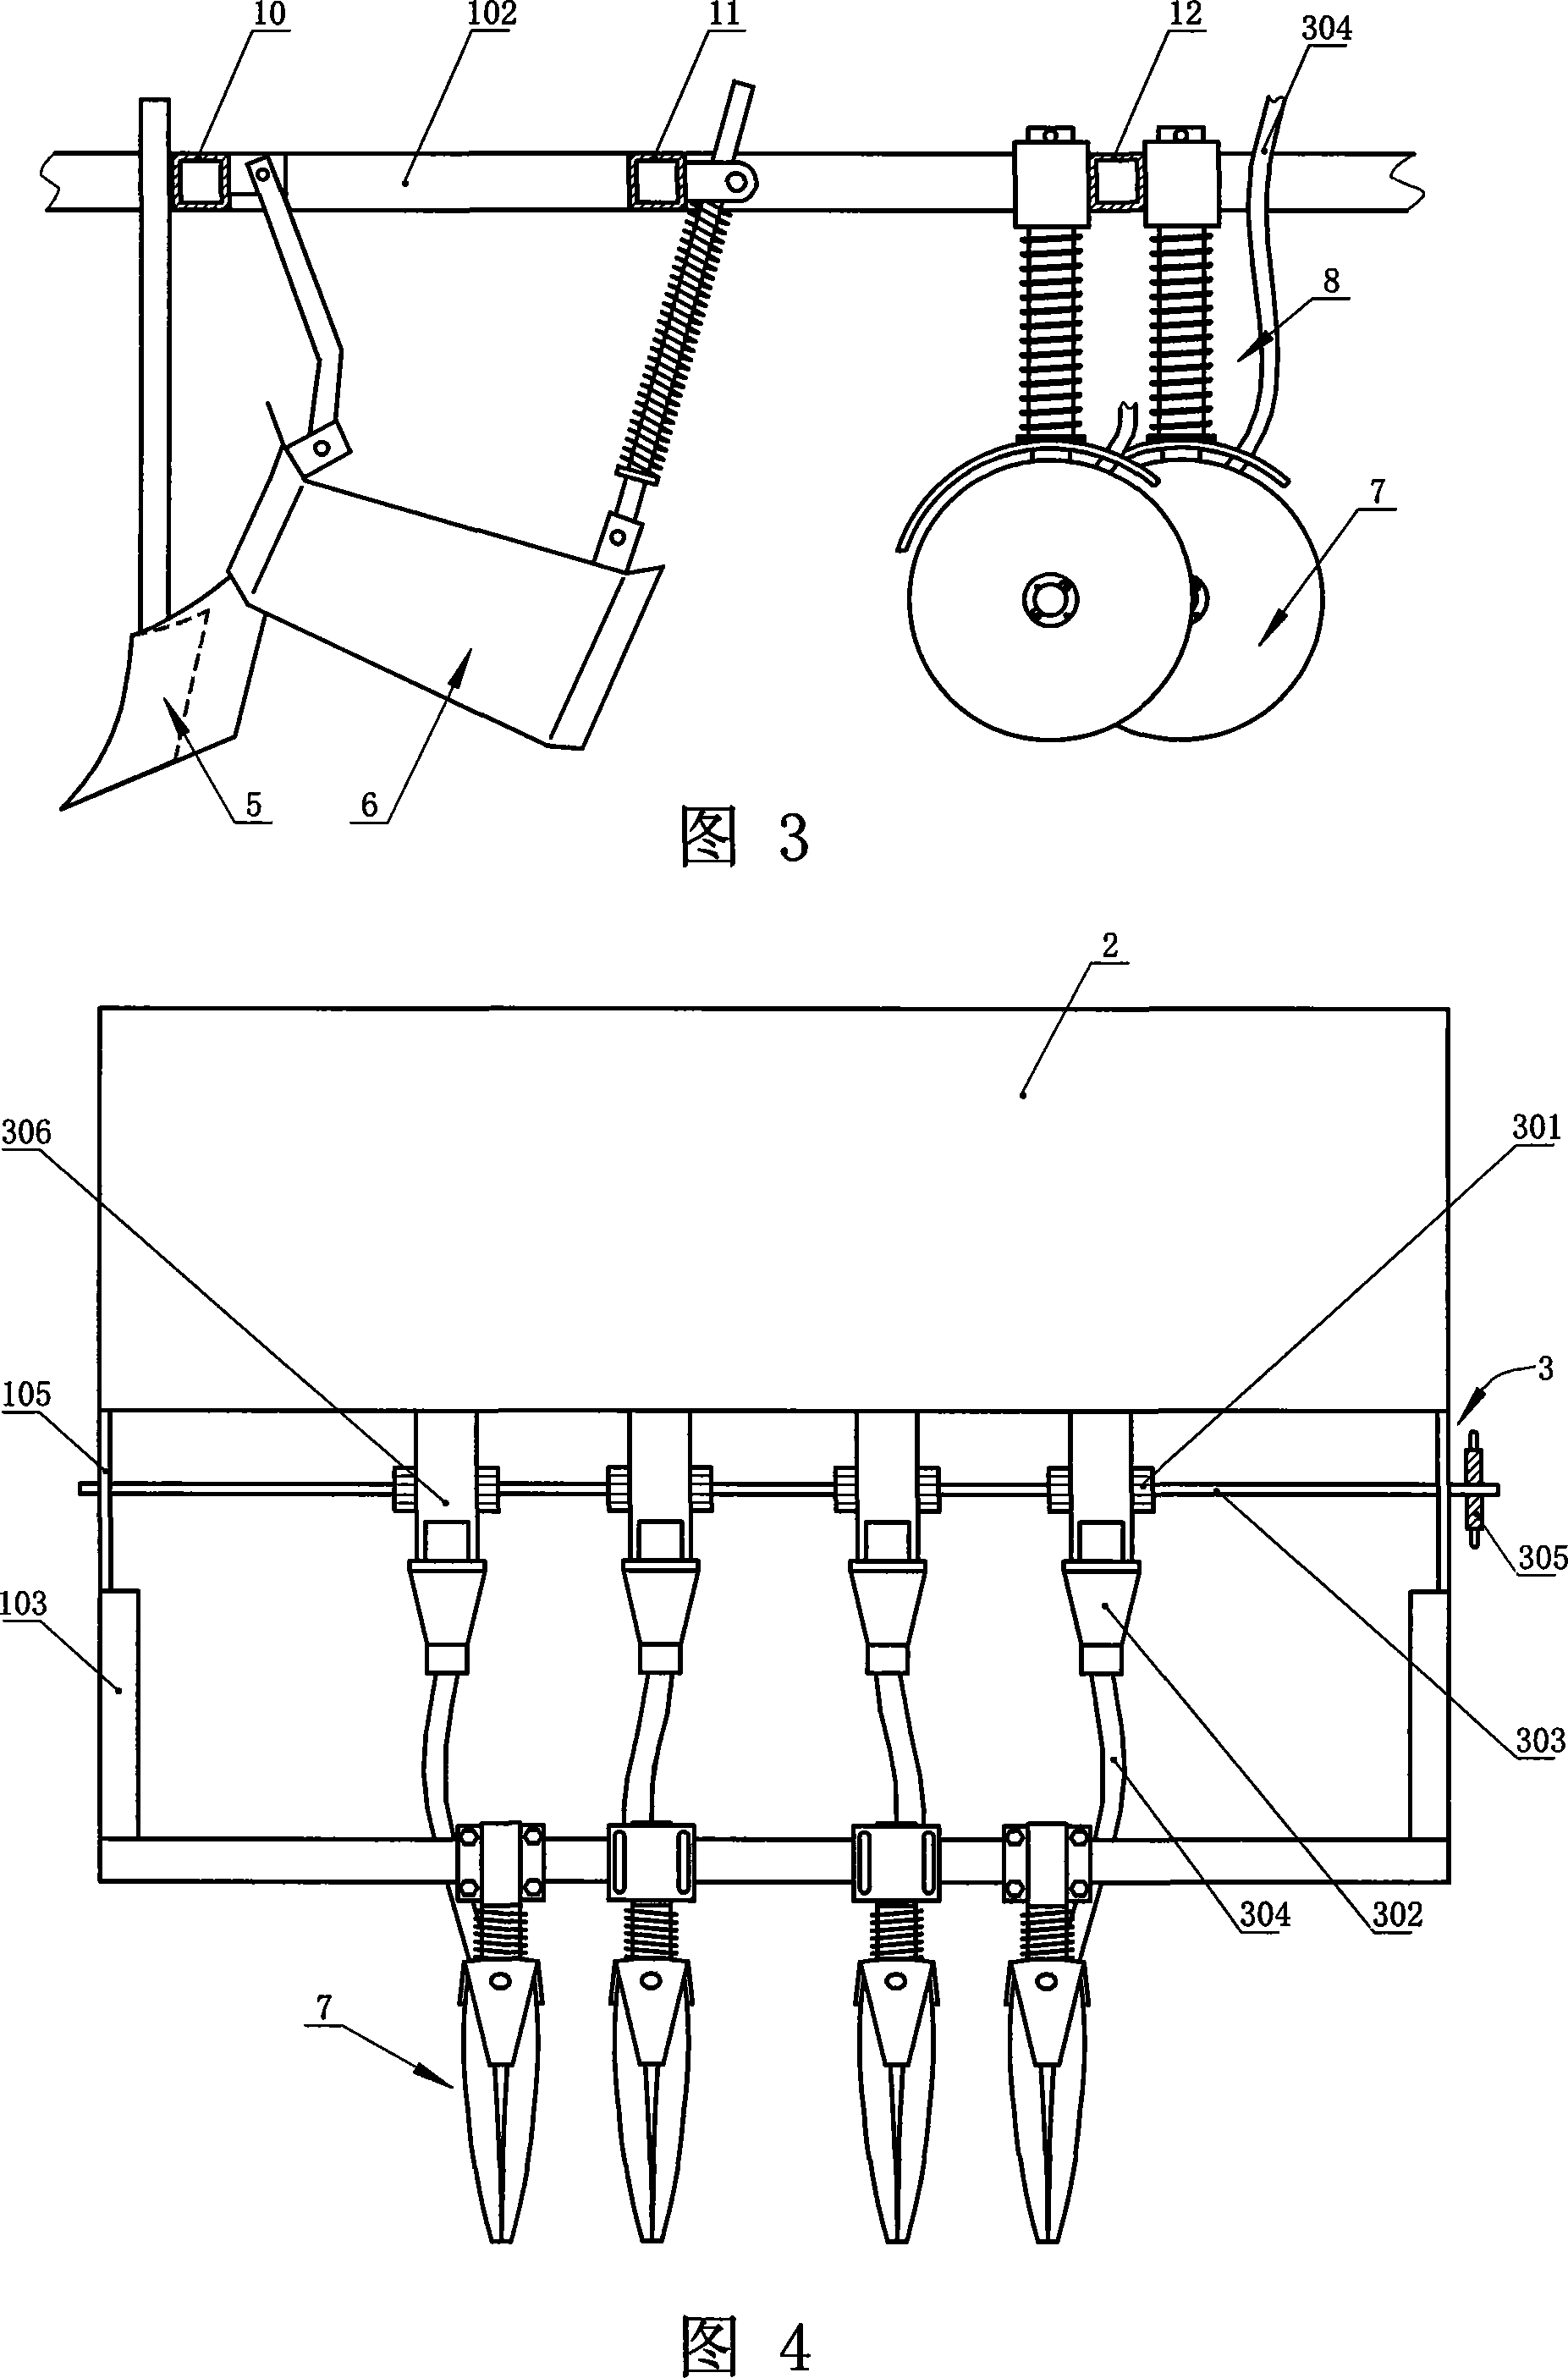 Wheat ridge-forming board and wheat ridge-forming seed-sowing machine